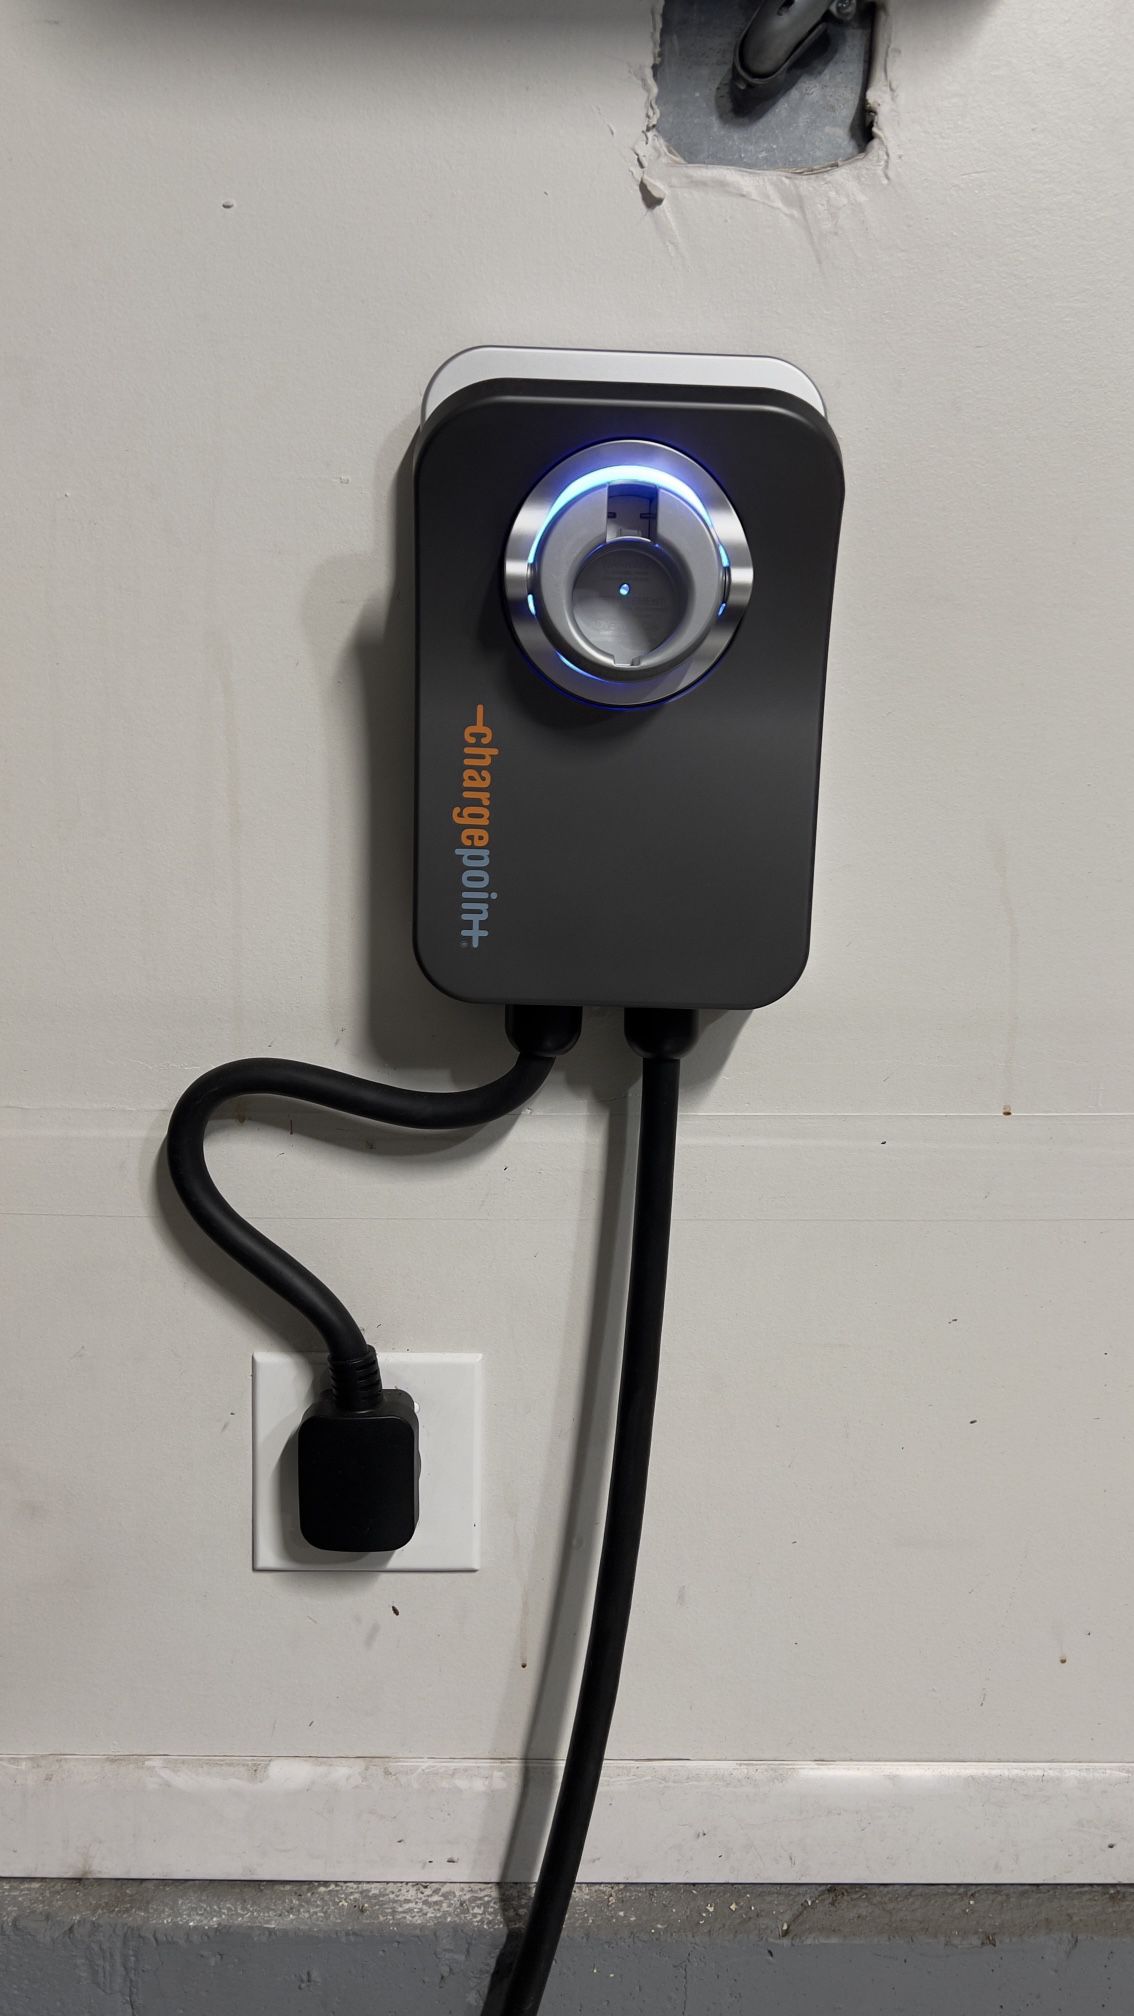 ChargePoint Home Flex Electric Vehicle (EV) Charger, 16 to 50 Amp, 240V, Level  WiFi Enabled EVSE, UL Listed, ENERGY STAR, NEMA 14-50 Plug or Hardwir for  Sale in Denver, CO OfferUp